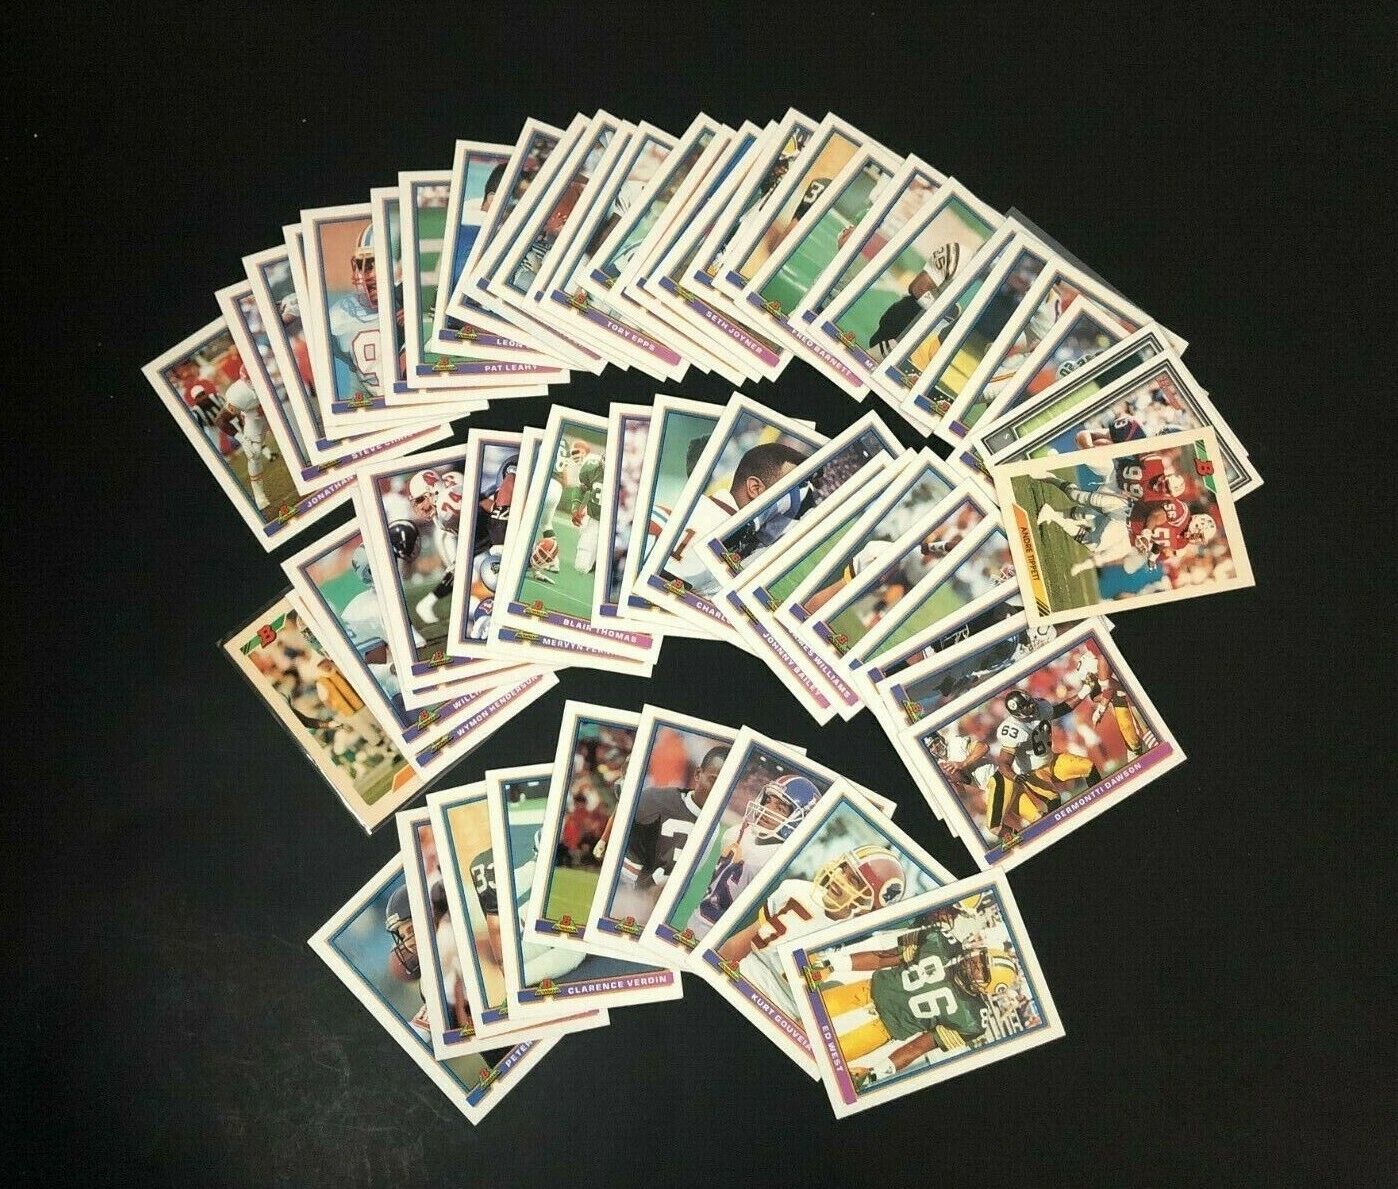 1991-1992 Bowman NFL Card Lot Mixed Vintage Retro Collectible Trading Cards 58 Без бренда